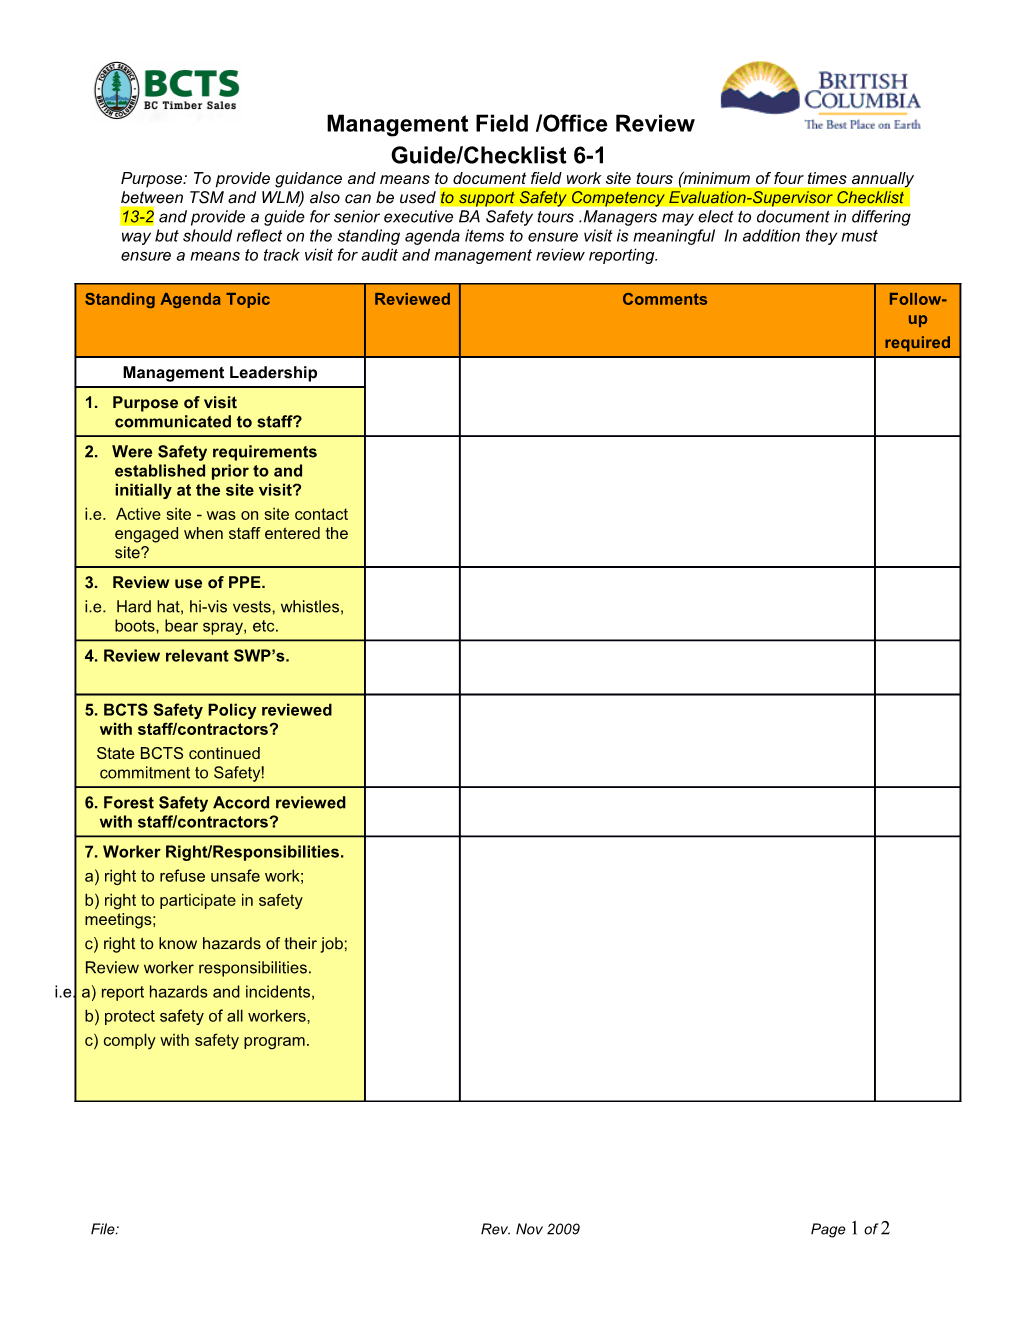 BCTS Management Review Checklist